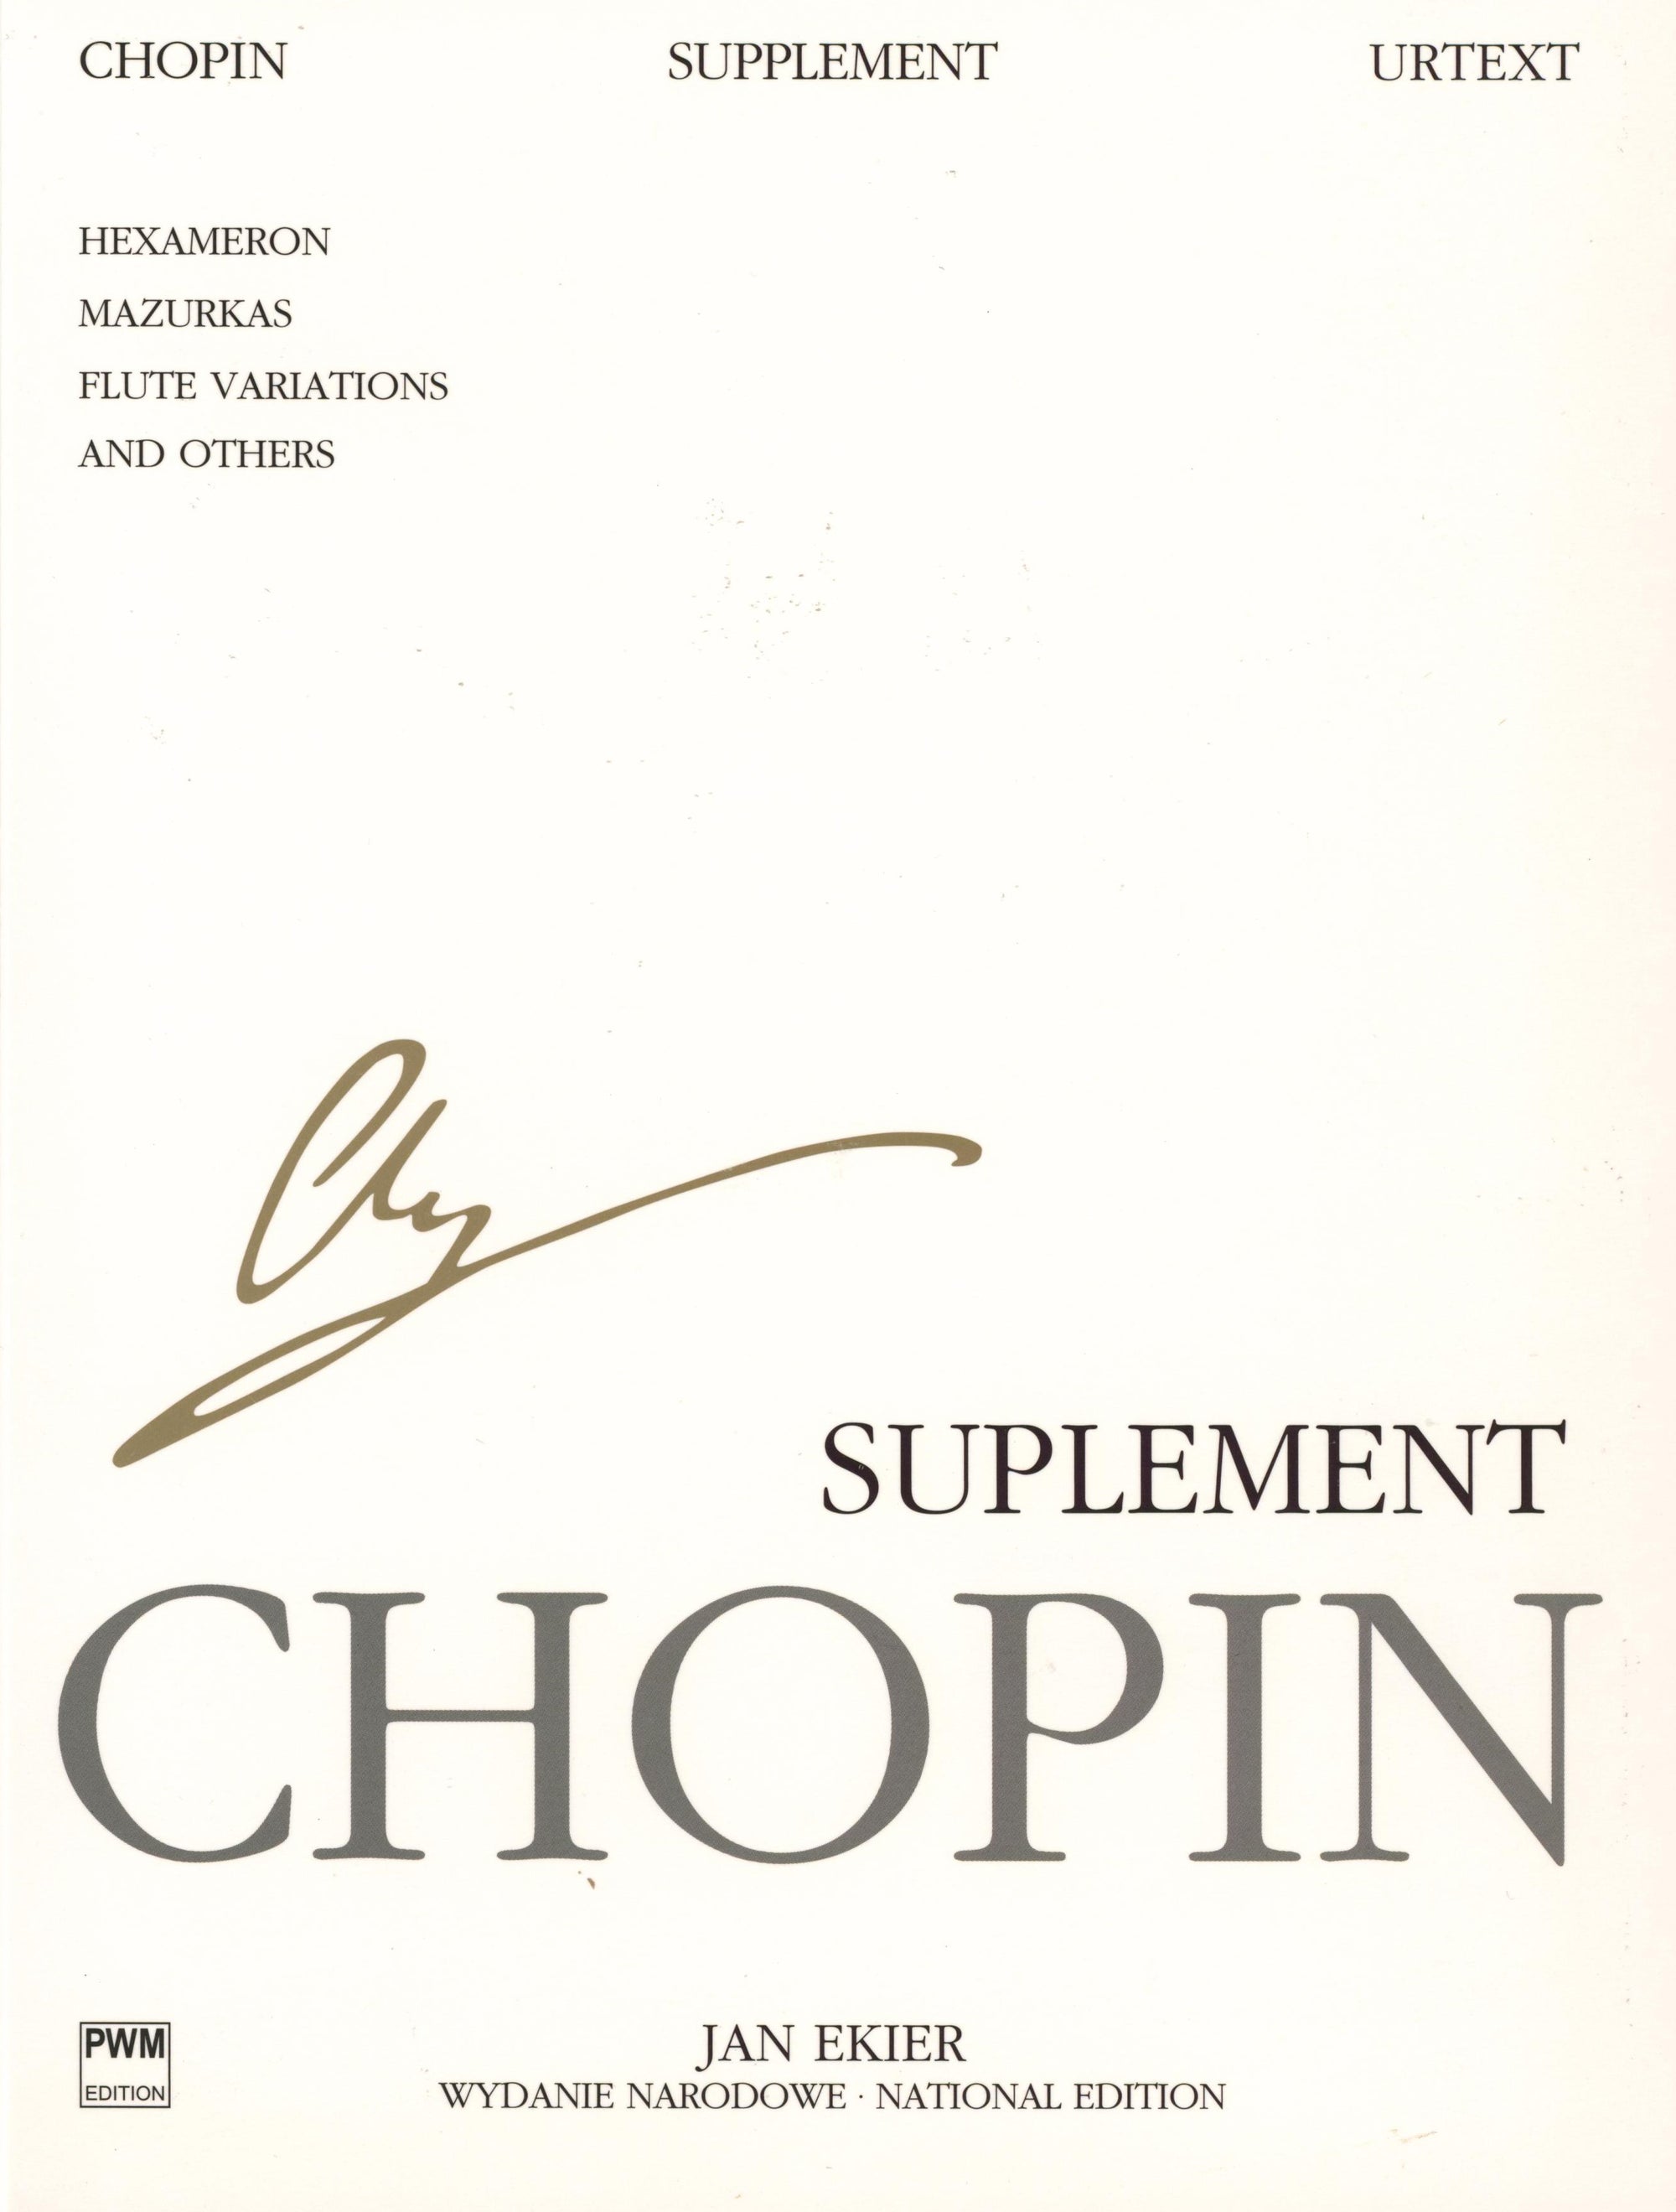 Compositions Partly by Chopin